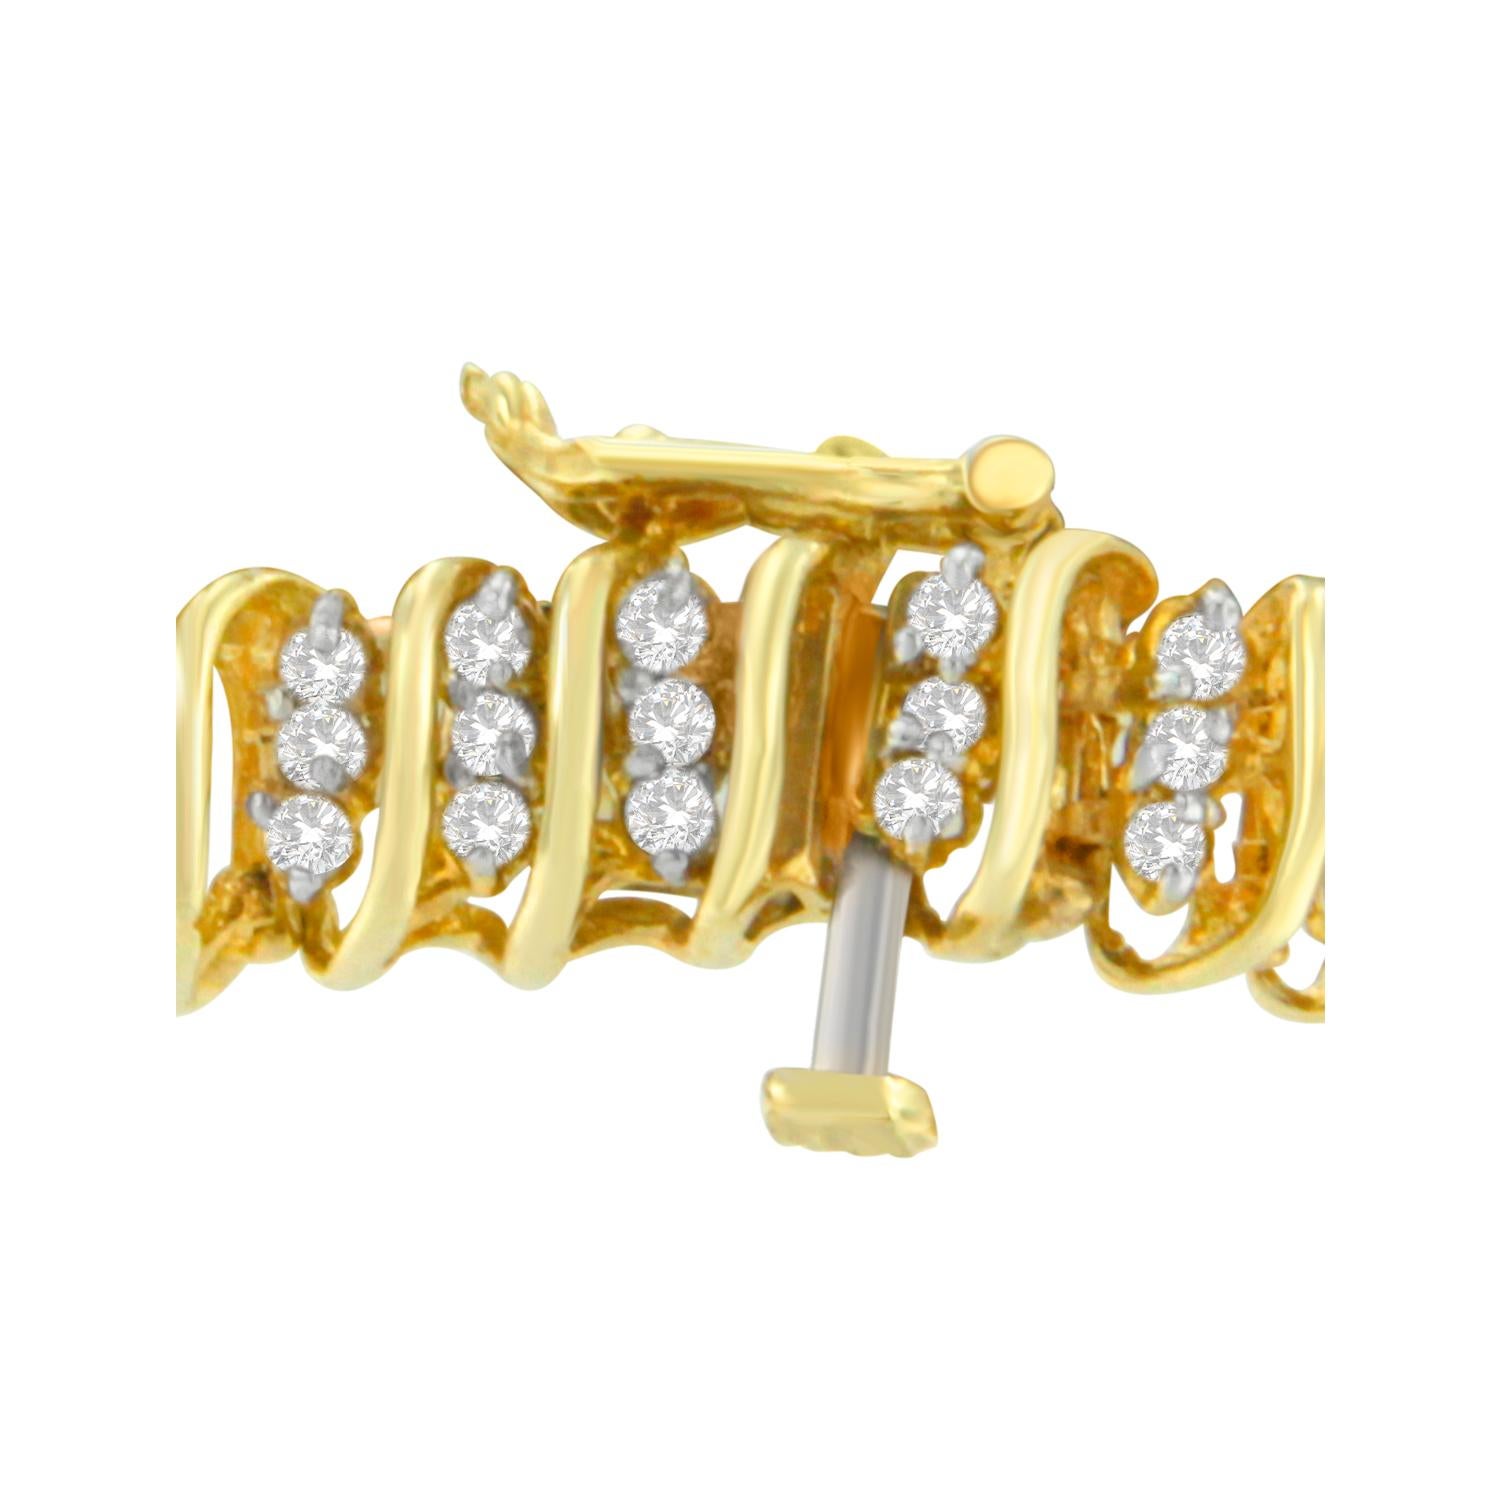 Each trio of round diamonds on this elegant bracelet is connected by a loop of shimmering yellow gold, which wraps around for an eye-catching presentation. Two carats in total make this one style that's sure to make her stand out. This diamond is